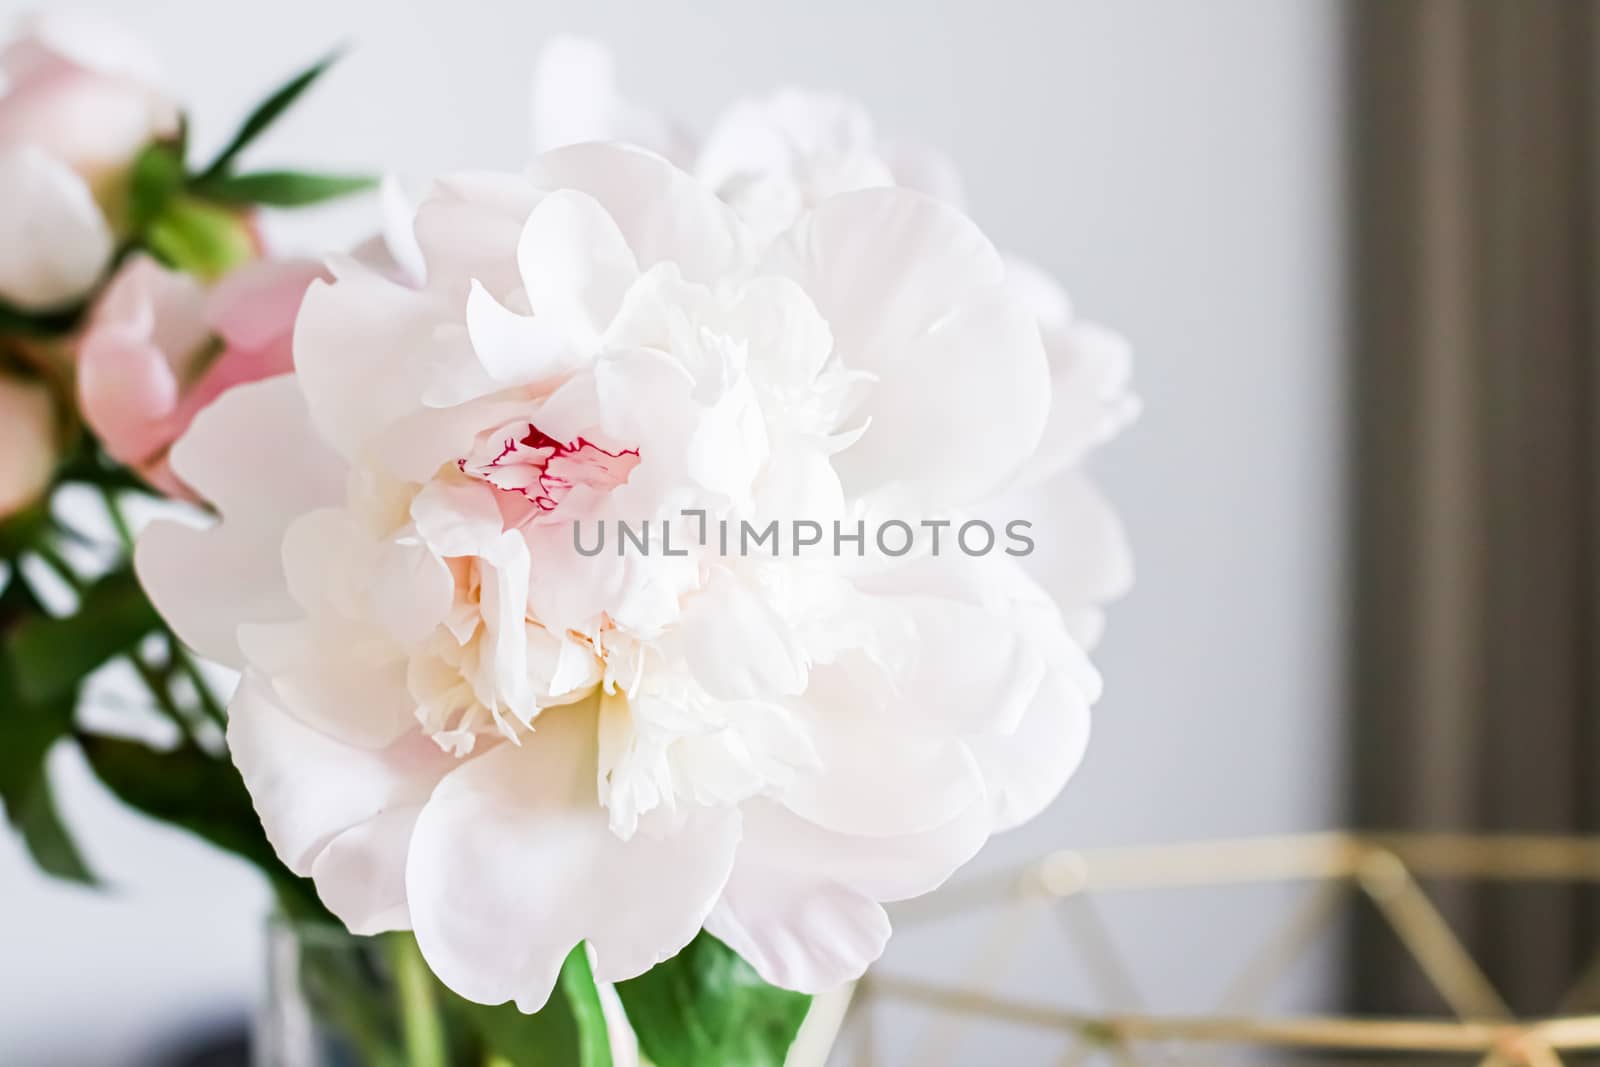 Chic bouquet of peony flowers in vase as home decor idea, luxury interior design and decoration concept